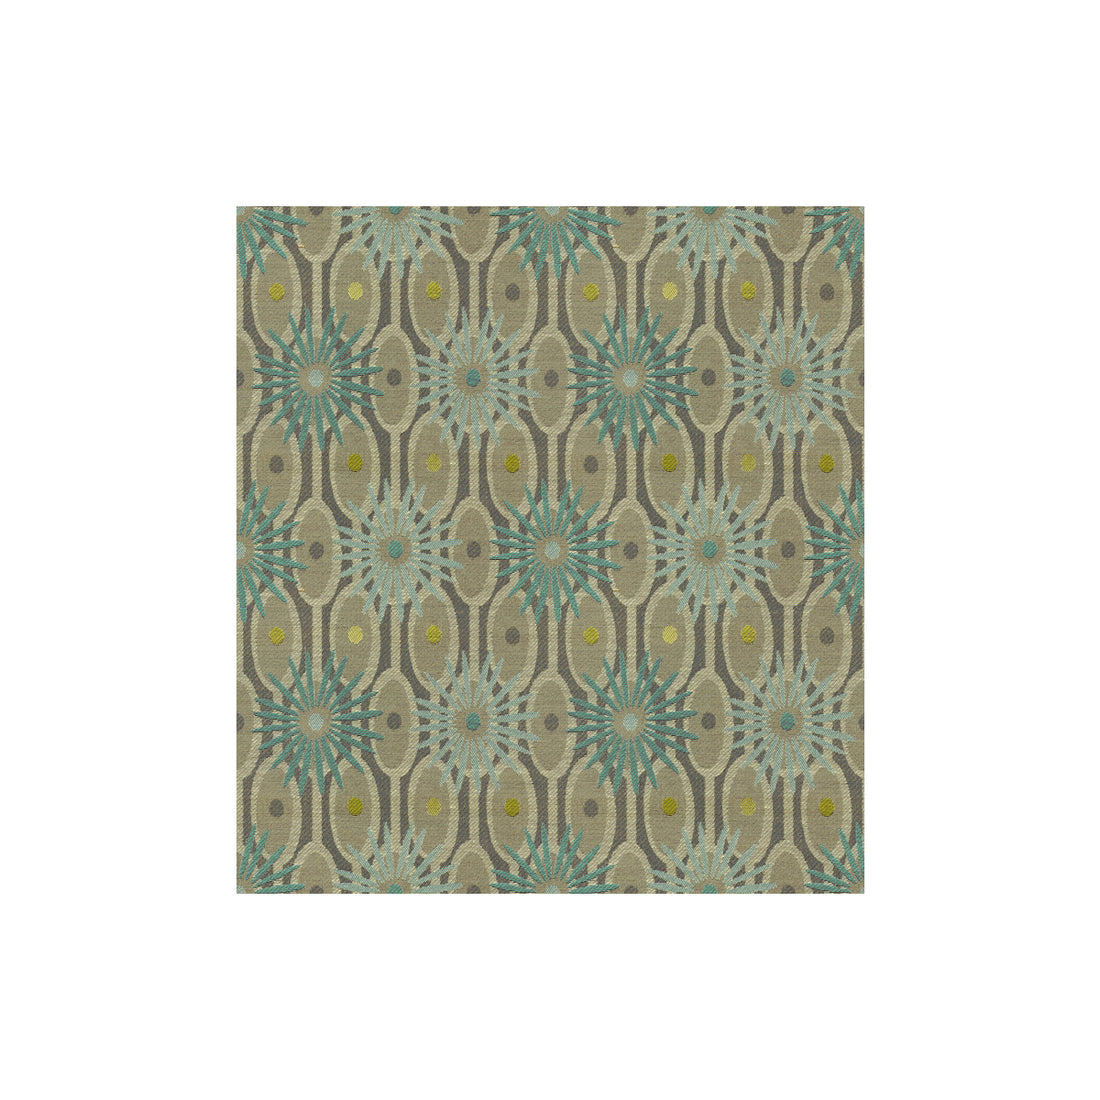 Burst Out fabric in capri color - pattern 32894.511.0 - by Kravet Contract in the Contract Gis collection